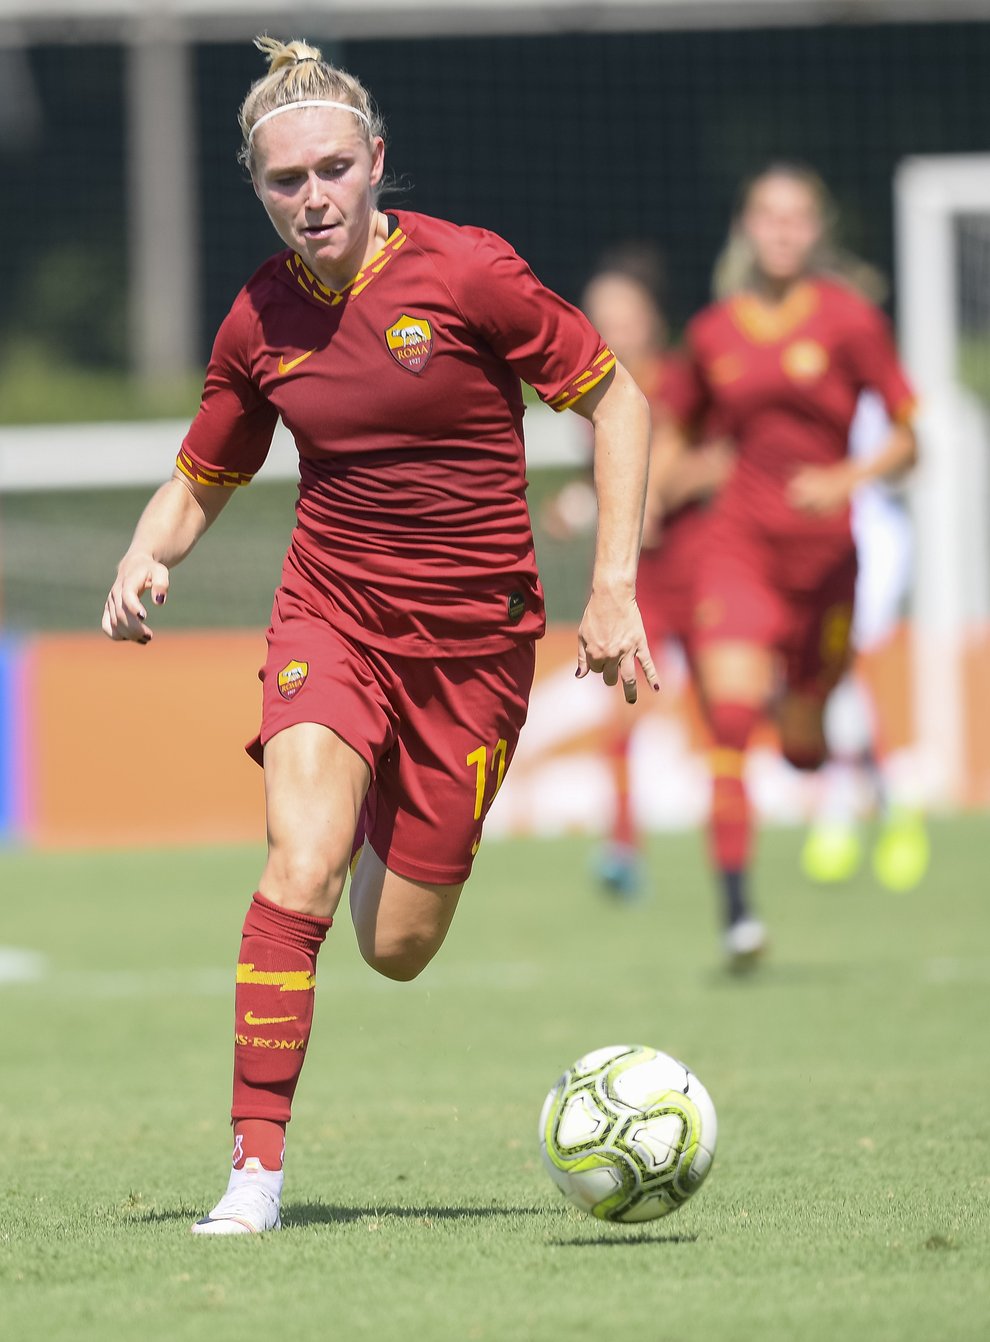 Amalie Thestrup is joining Liverpool from AS Roma